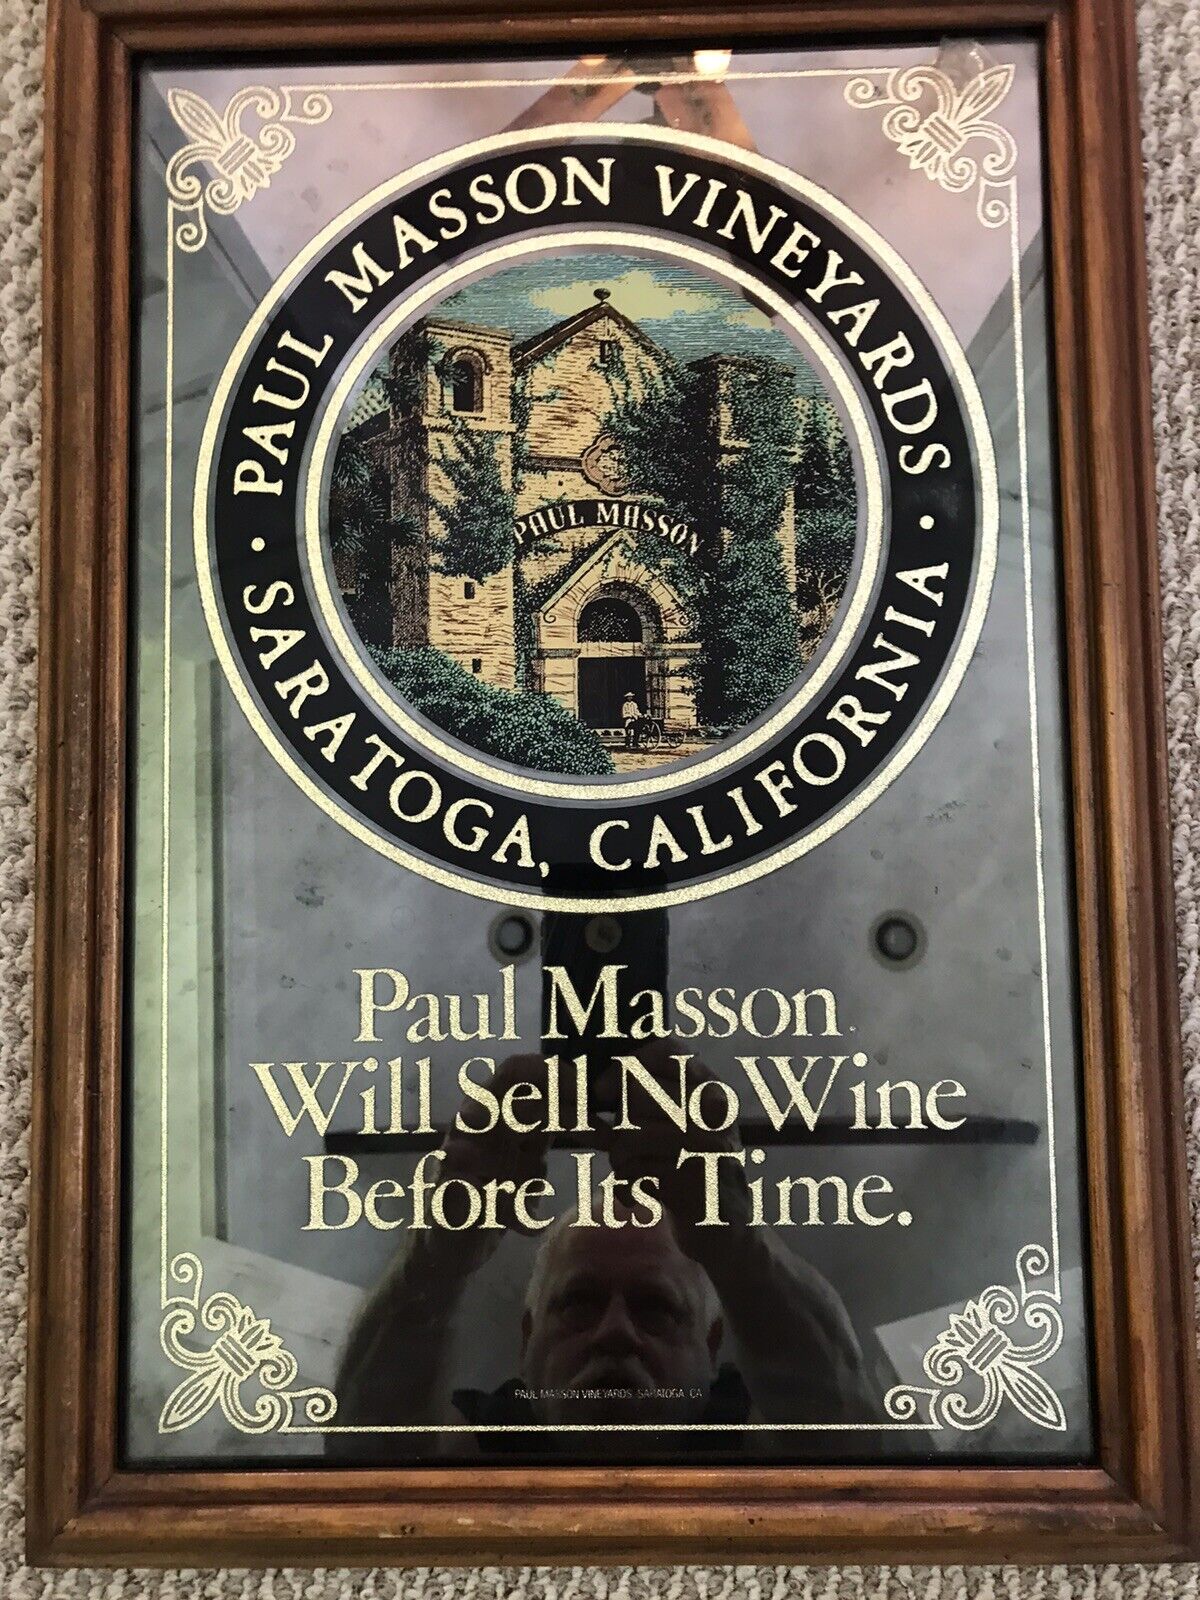 PAUL MASSON VINEYARDS WINE ADVERTISING MIRROR 14” x 20” WITH WOOD FRAME